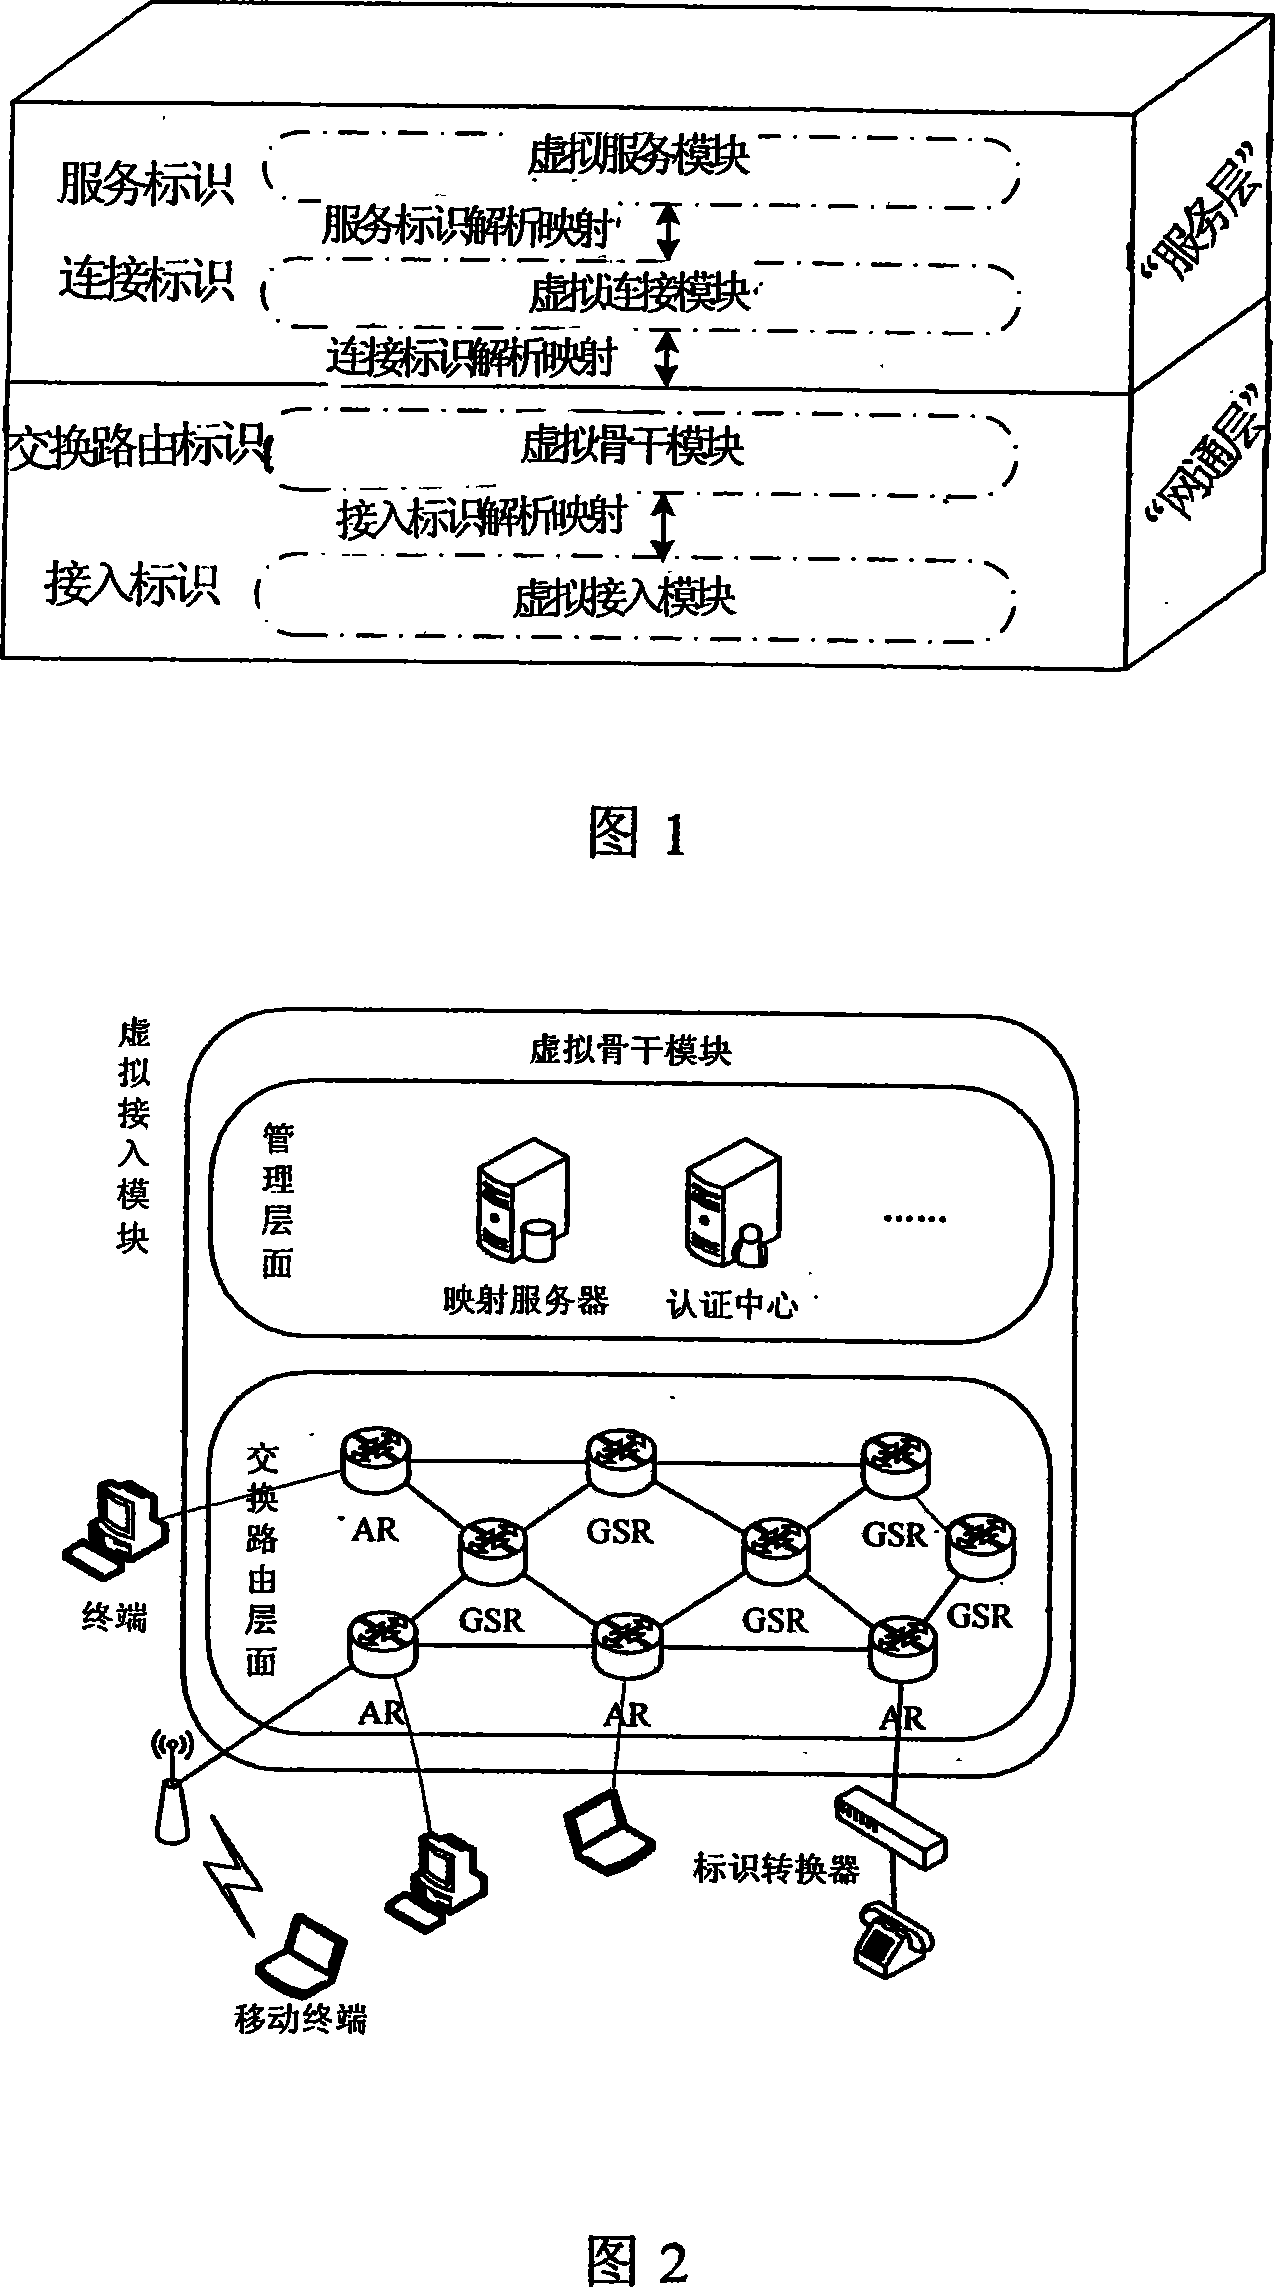 Method for managing integrated network locations